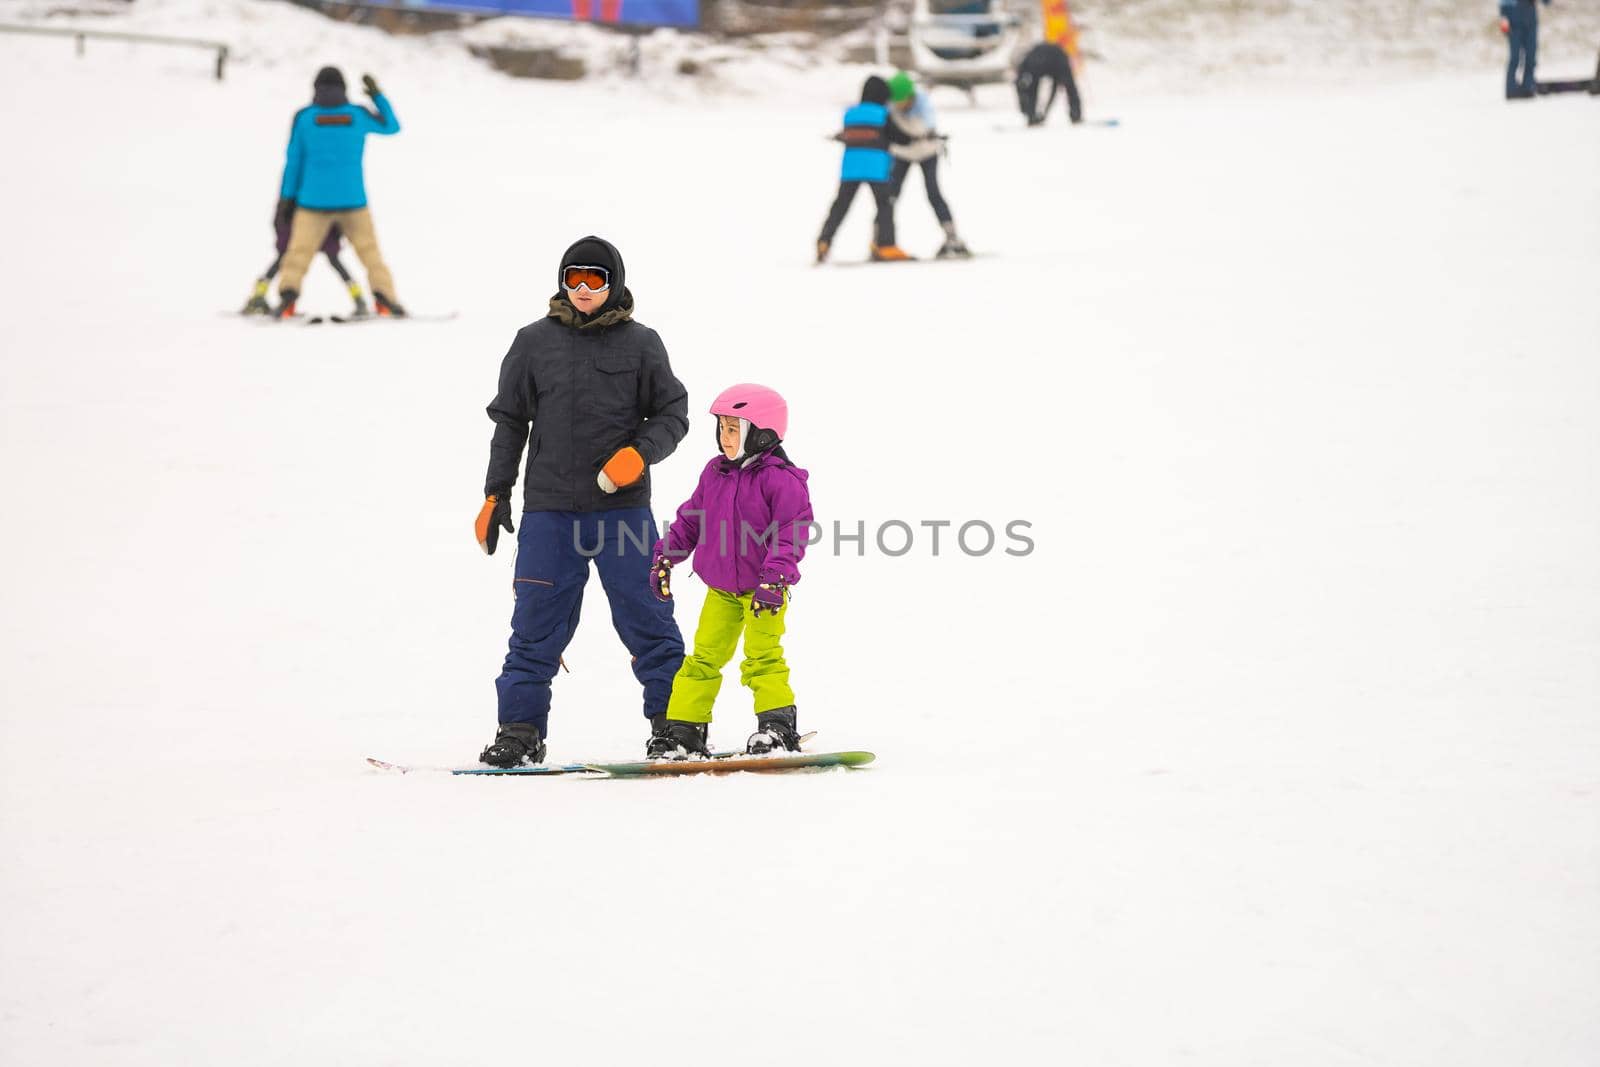 Instructors teach a child on a snow slope to snowboard